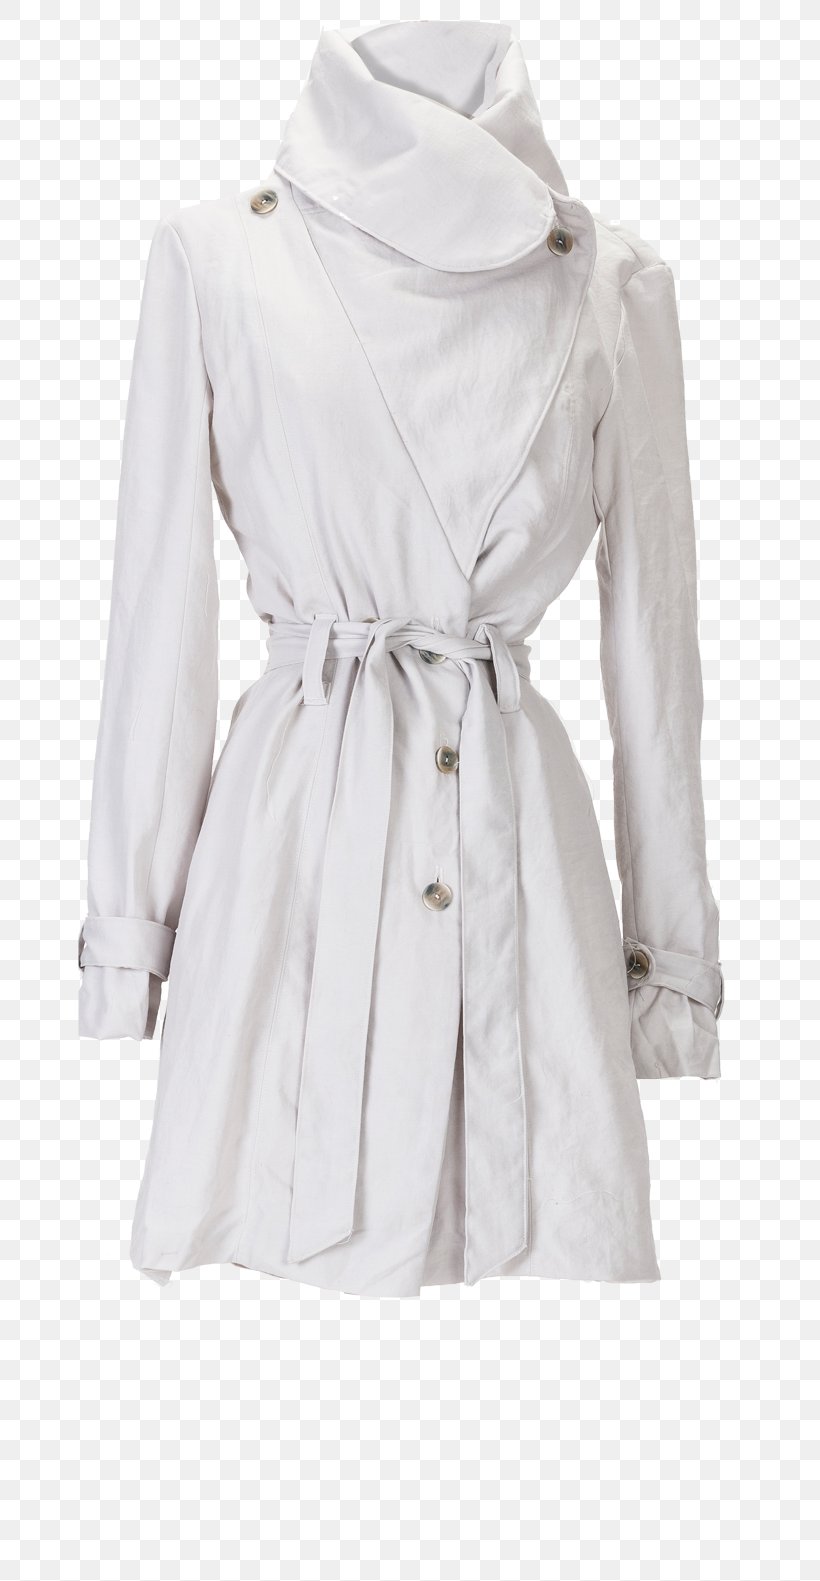 Trench Coat Overcoat Sleeve Dress, PNG, 806x1581px, Trench Coat, Clothing, Coat, Day Dress, Dress Download Free